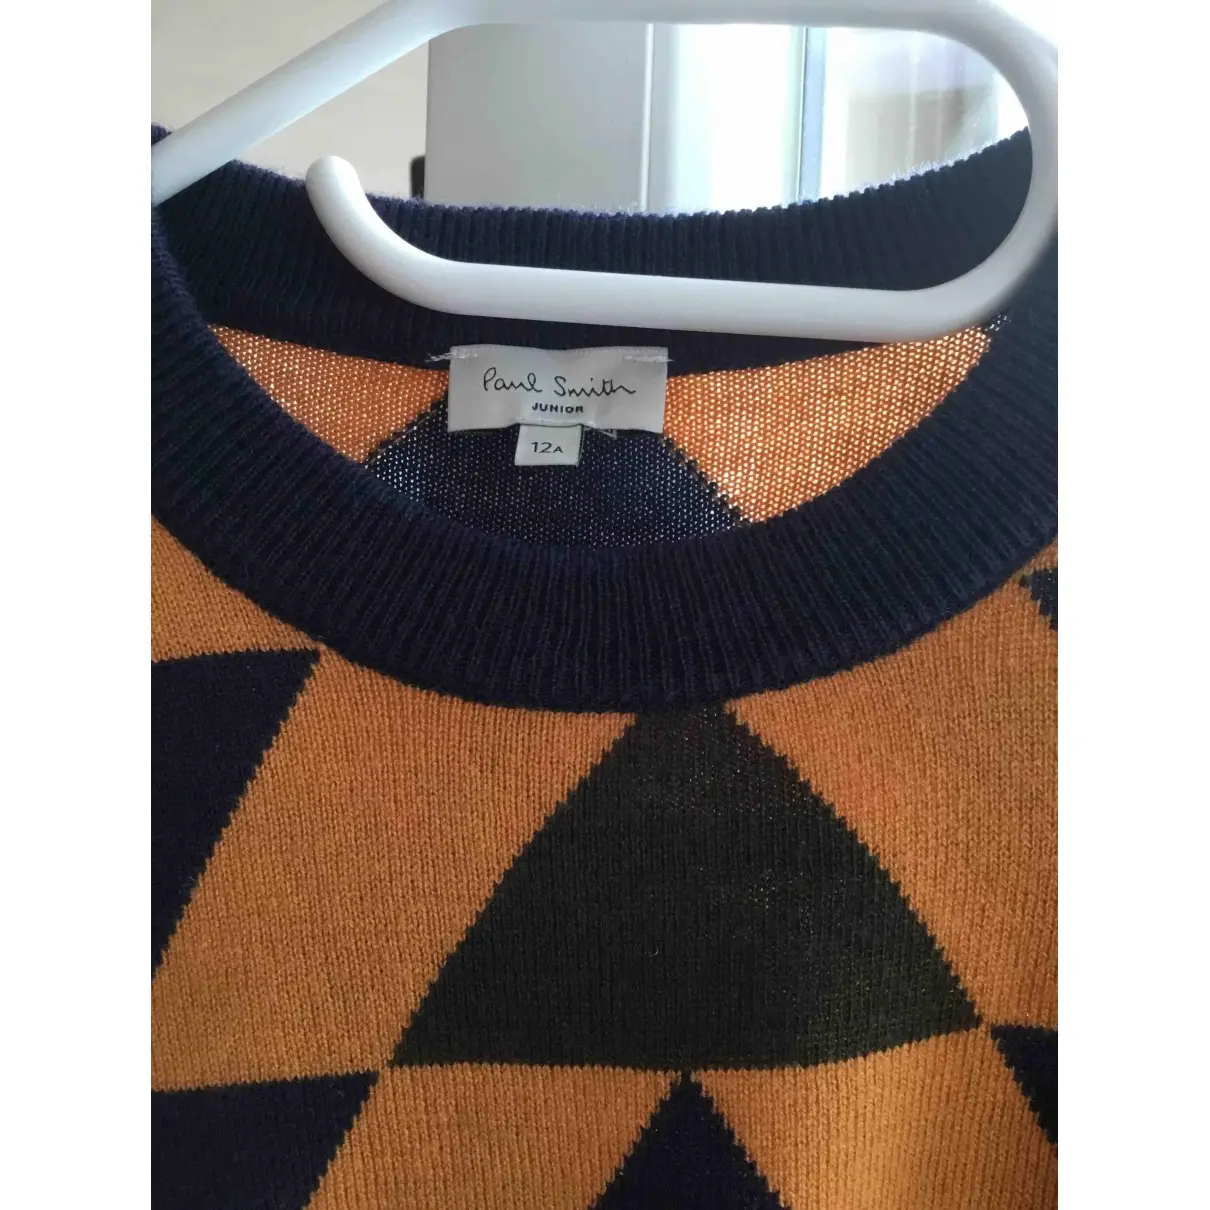 Paul Smith Wool sweater for sale